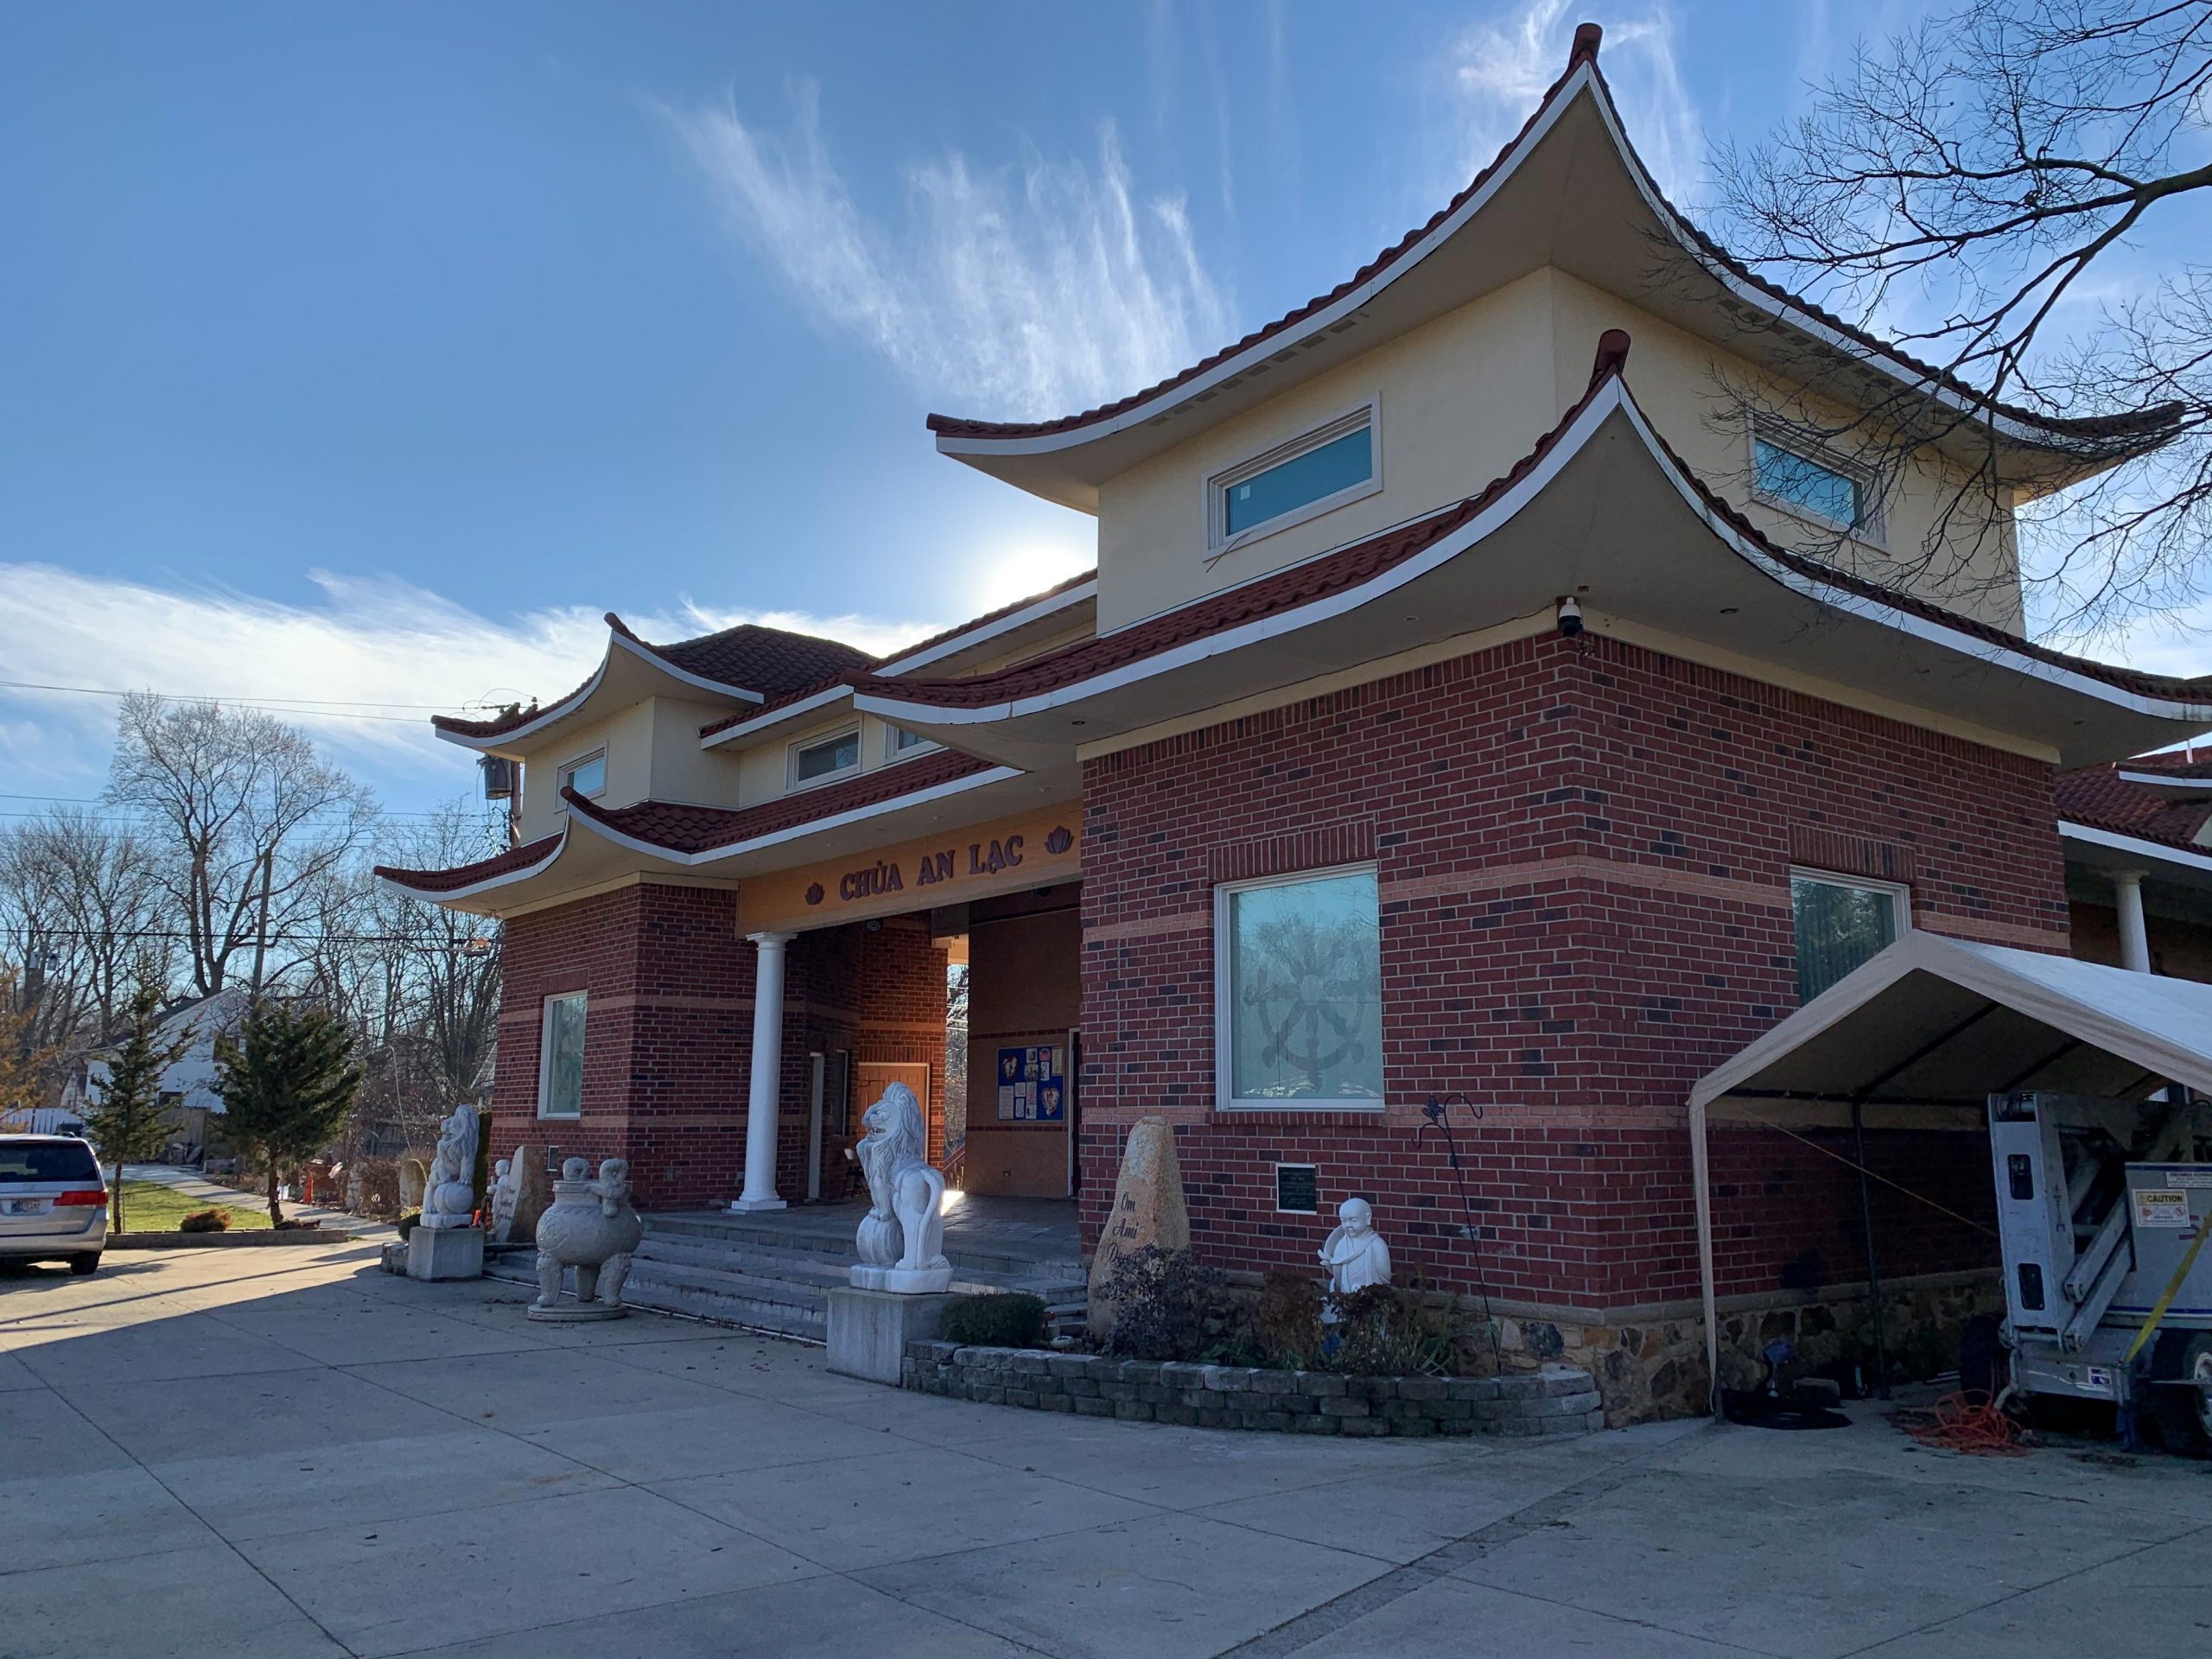 Front view of the Chùa An Lḁc Vietnamese Buddhist Temple, ca. 2010s